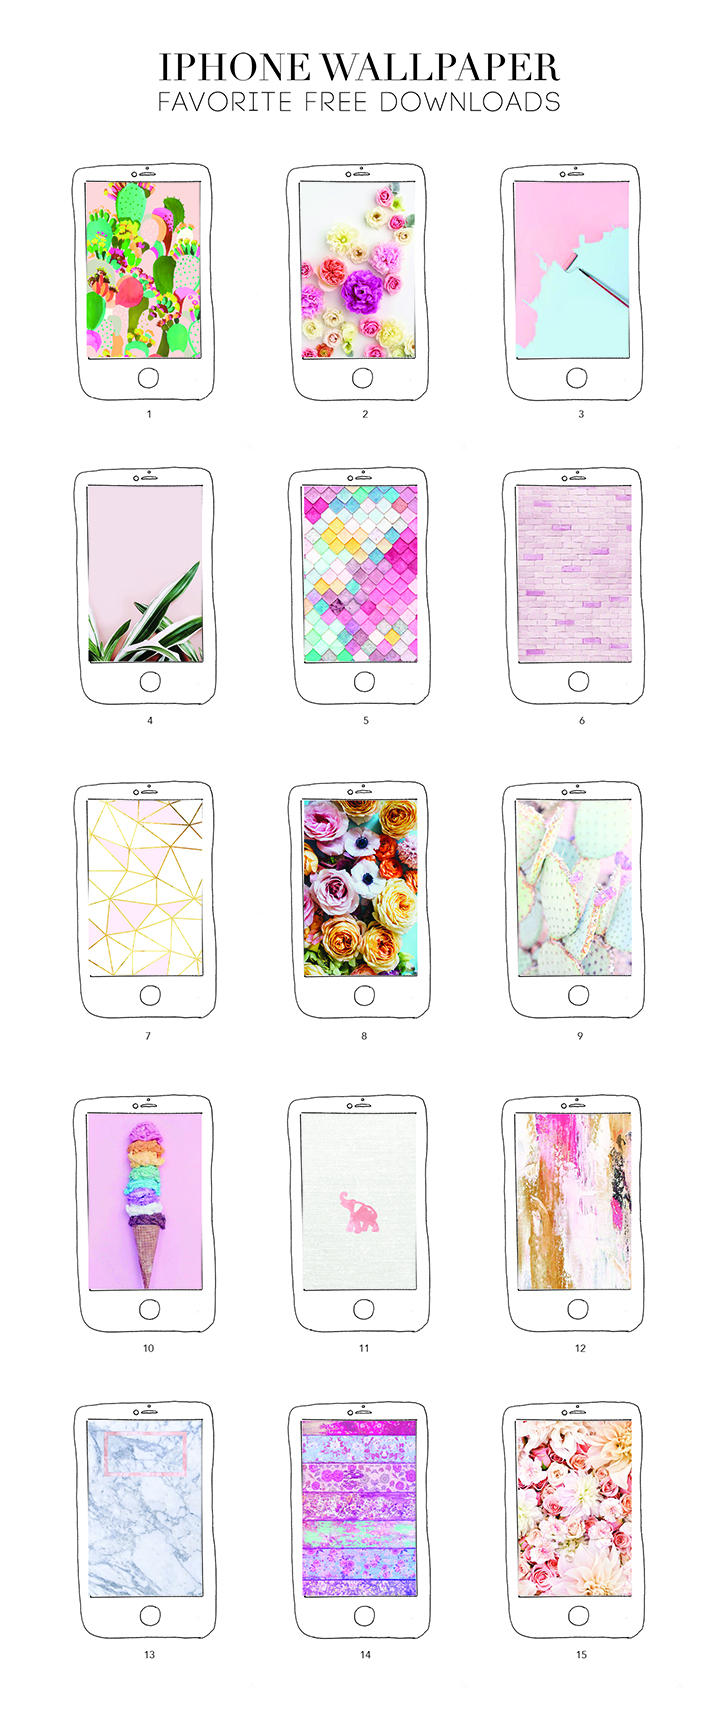 Our 15 Favorite iPhone Wallpaper Free Downloads – the pink edition!